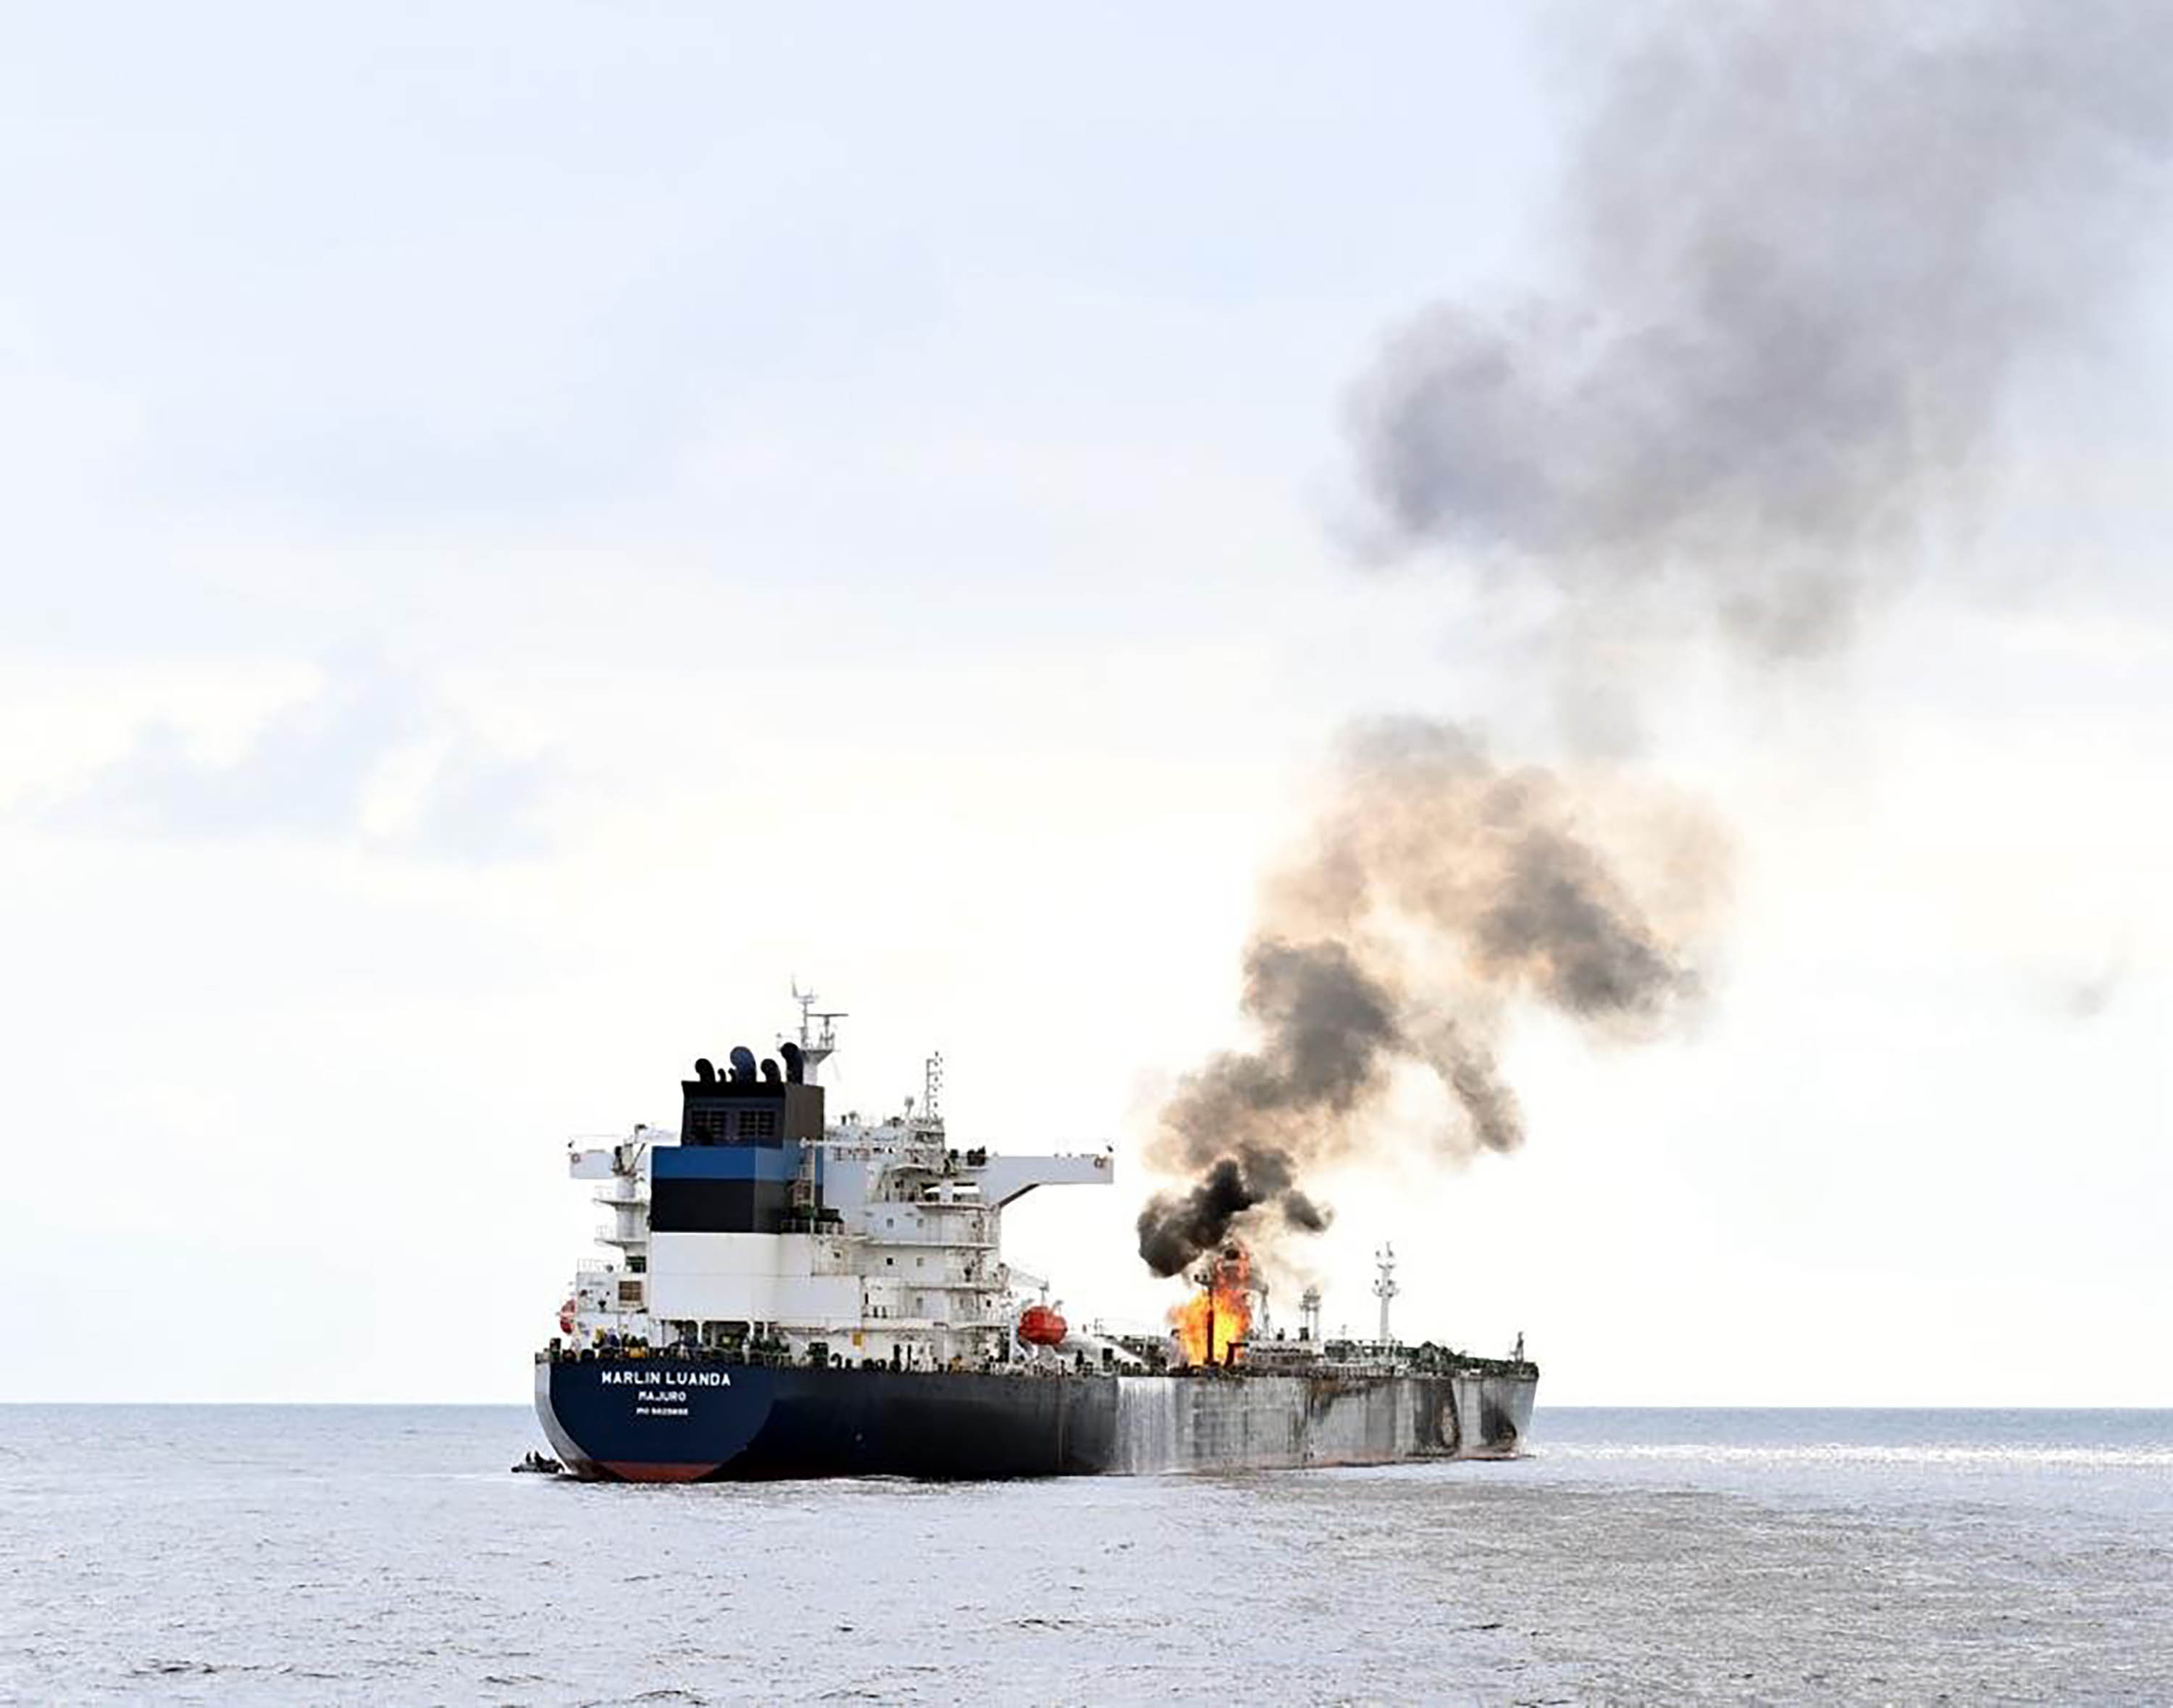 The Marlin Luanda vessel on fire in the Gulf of Aden after it was reportedly struck by an anti-ship missile fired from a Houthi-controlled area of Yemen on Friday.